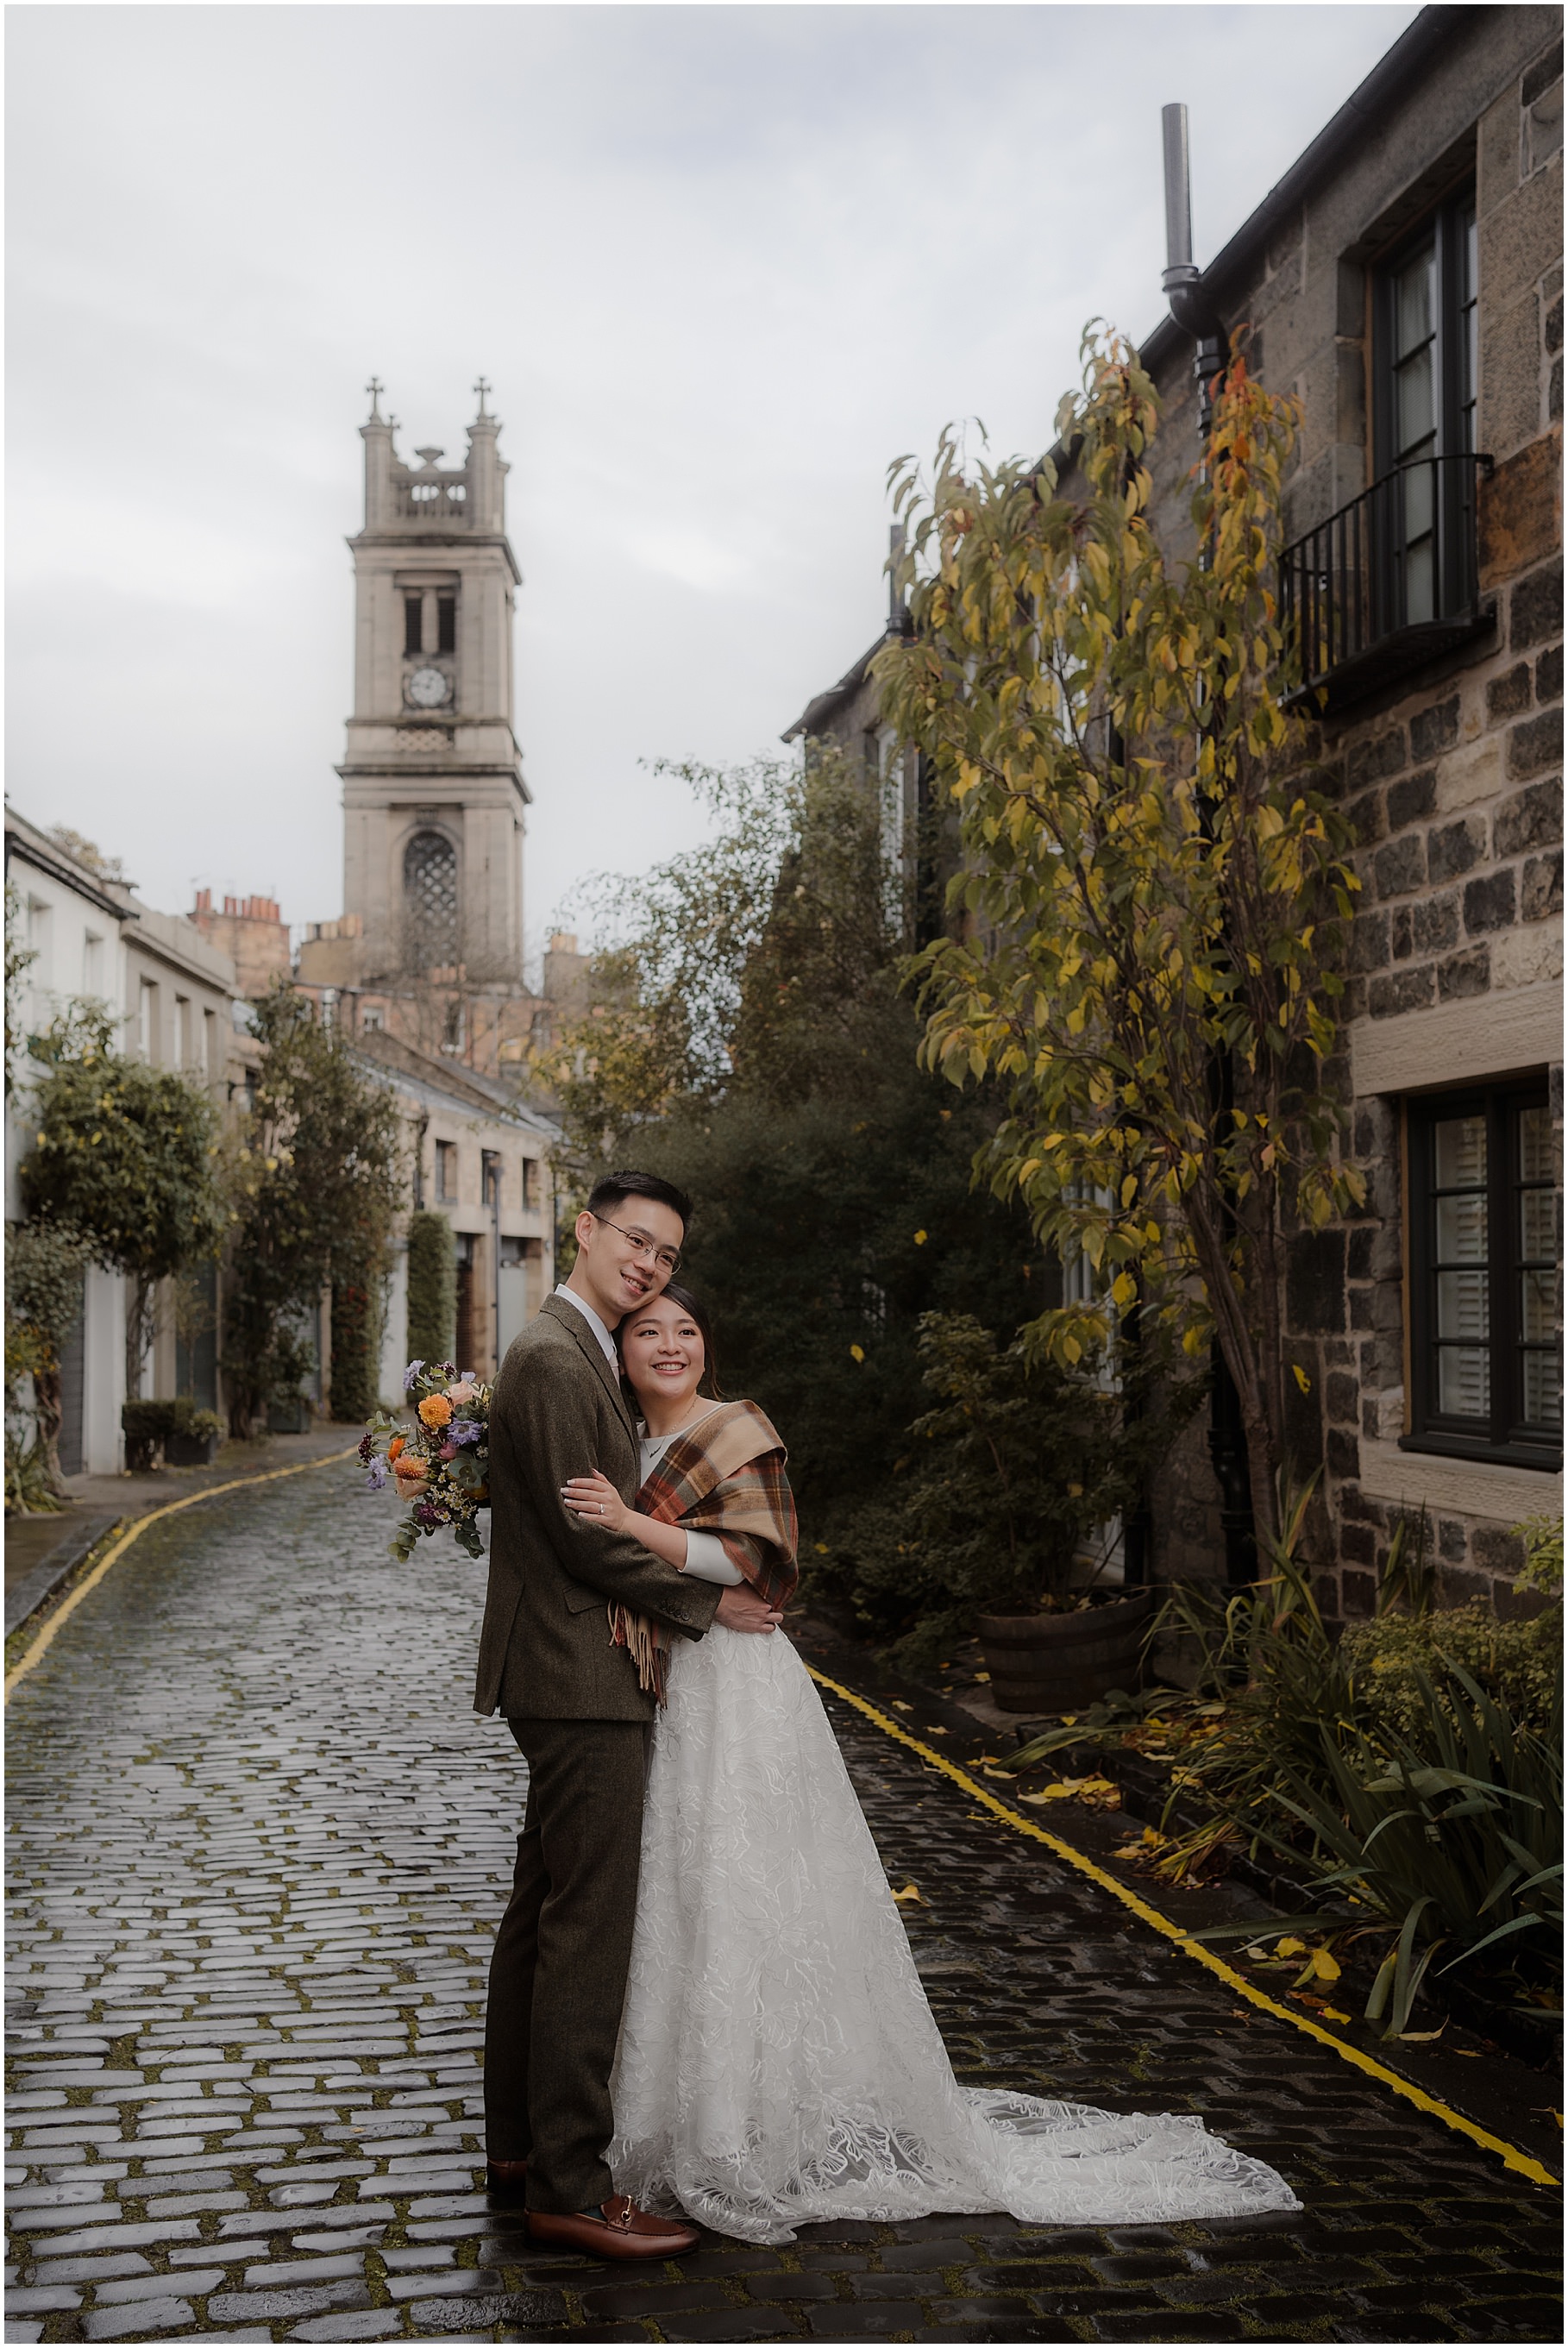 The Royal College of Physicians - Ediburgh elopement and wedding venues